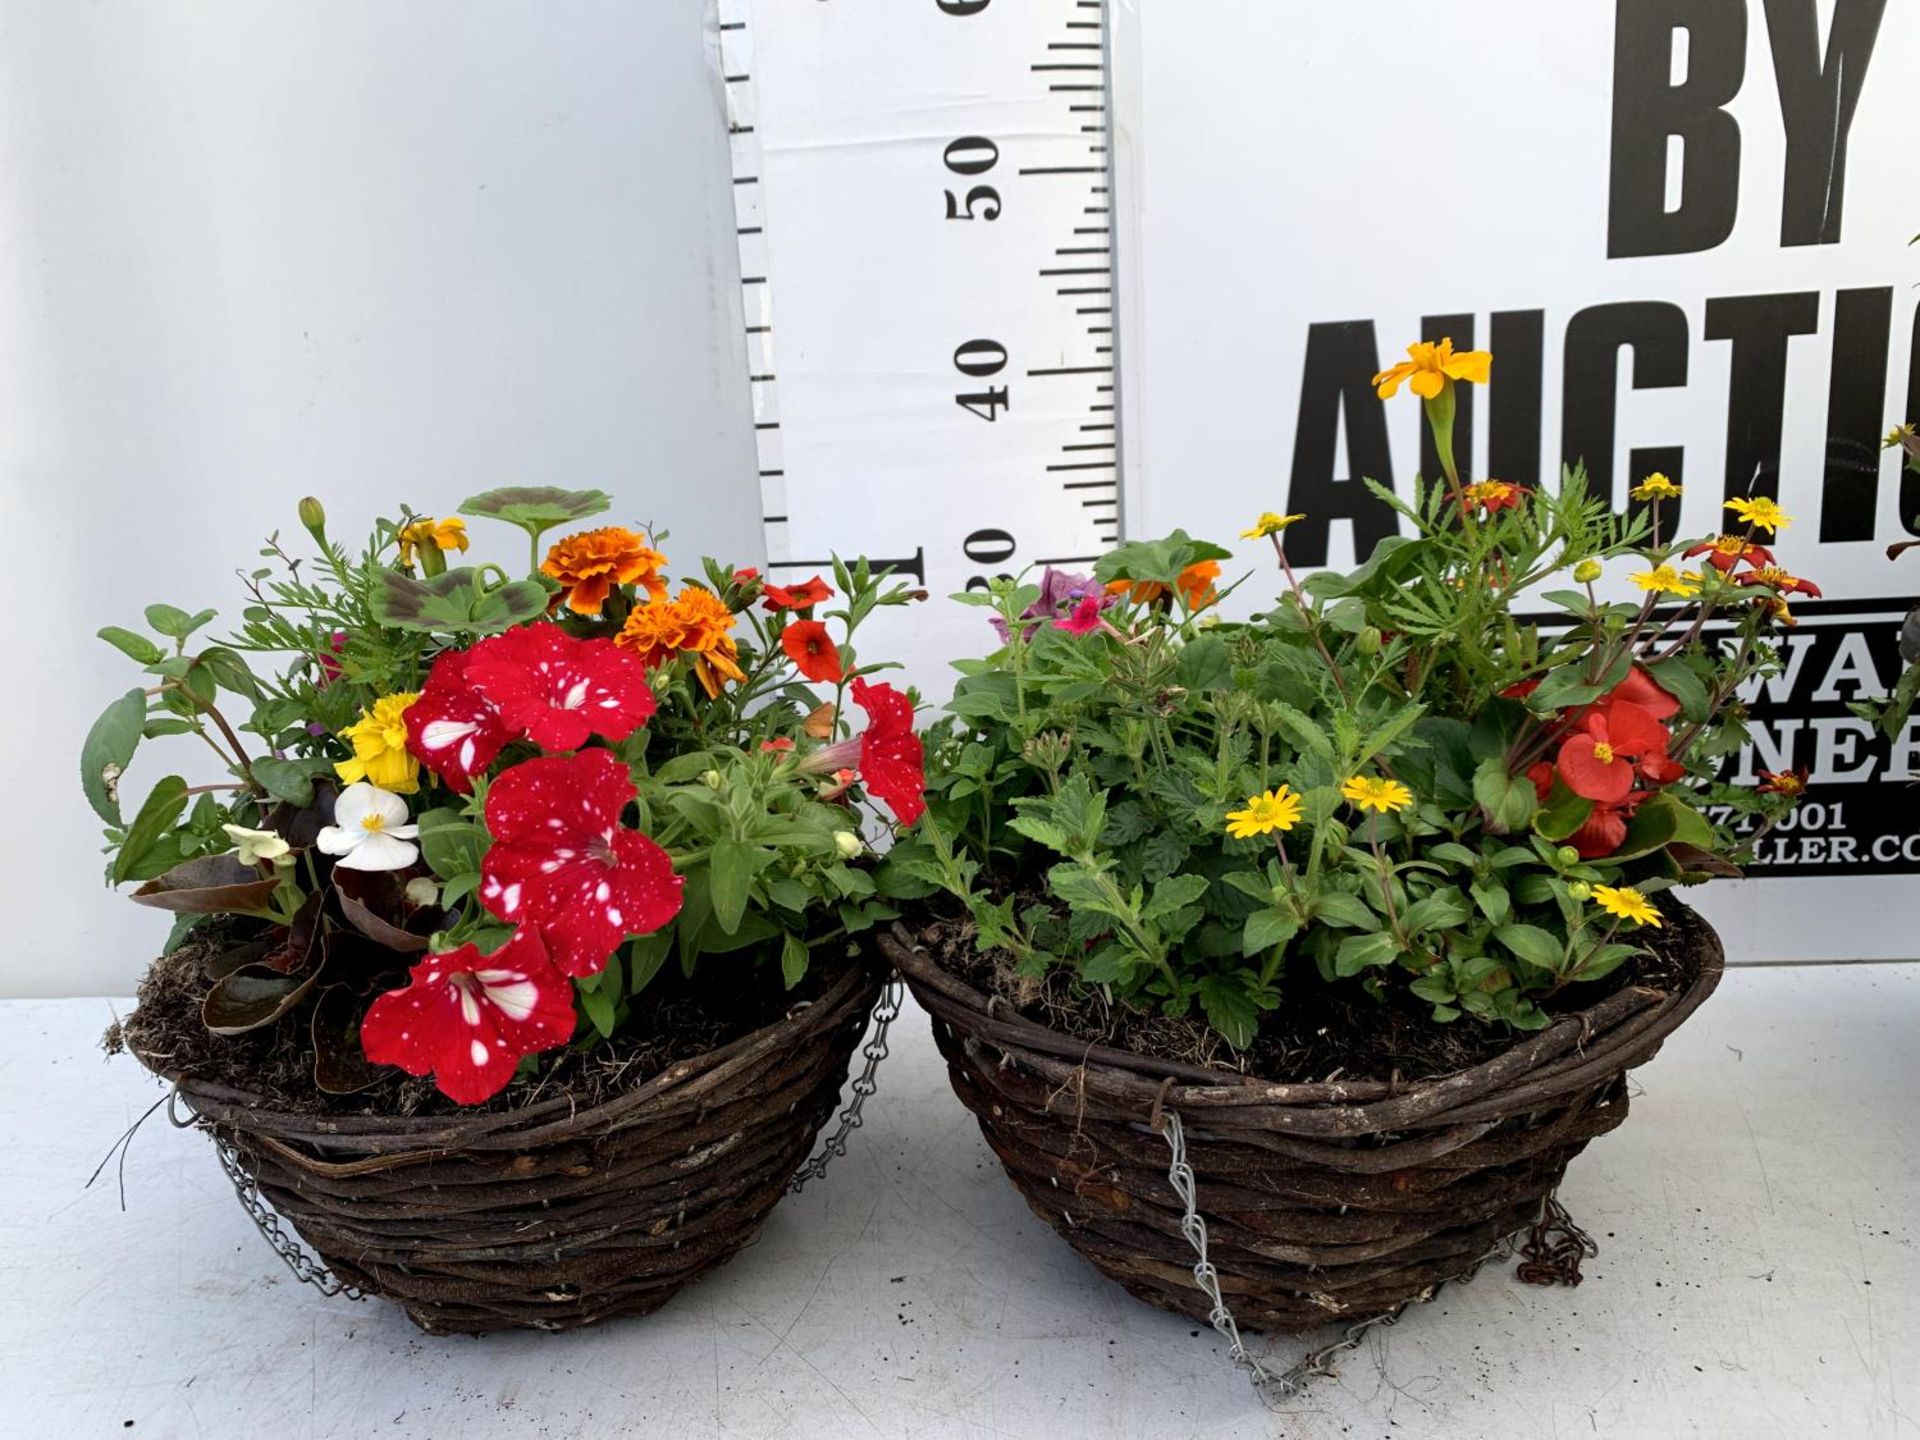 TWO WICKER HANGING BASKETS PLANTED WITH VARIOUS BEDDING PLANTS INCLUDING MARIGOLD PETUNIA VERBENA